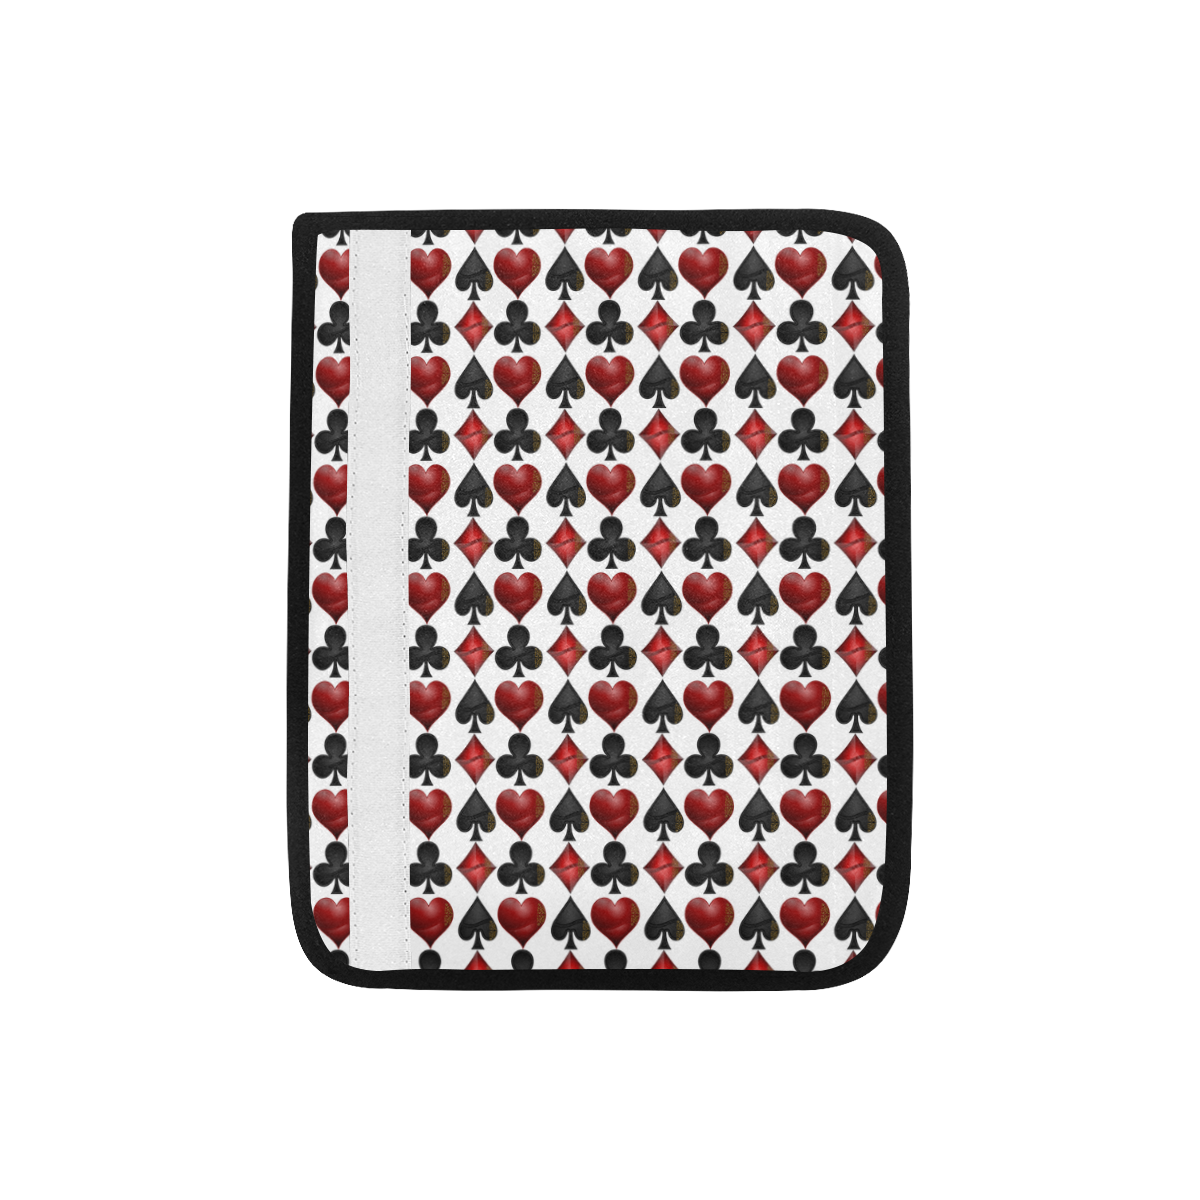 Las Vegas Black and Red Casino Poker Card Shapes on White Car Seat Belt Cover 7''x8.5''